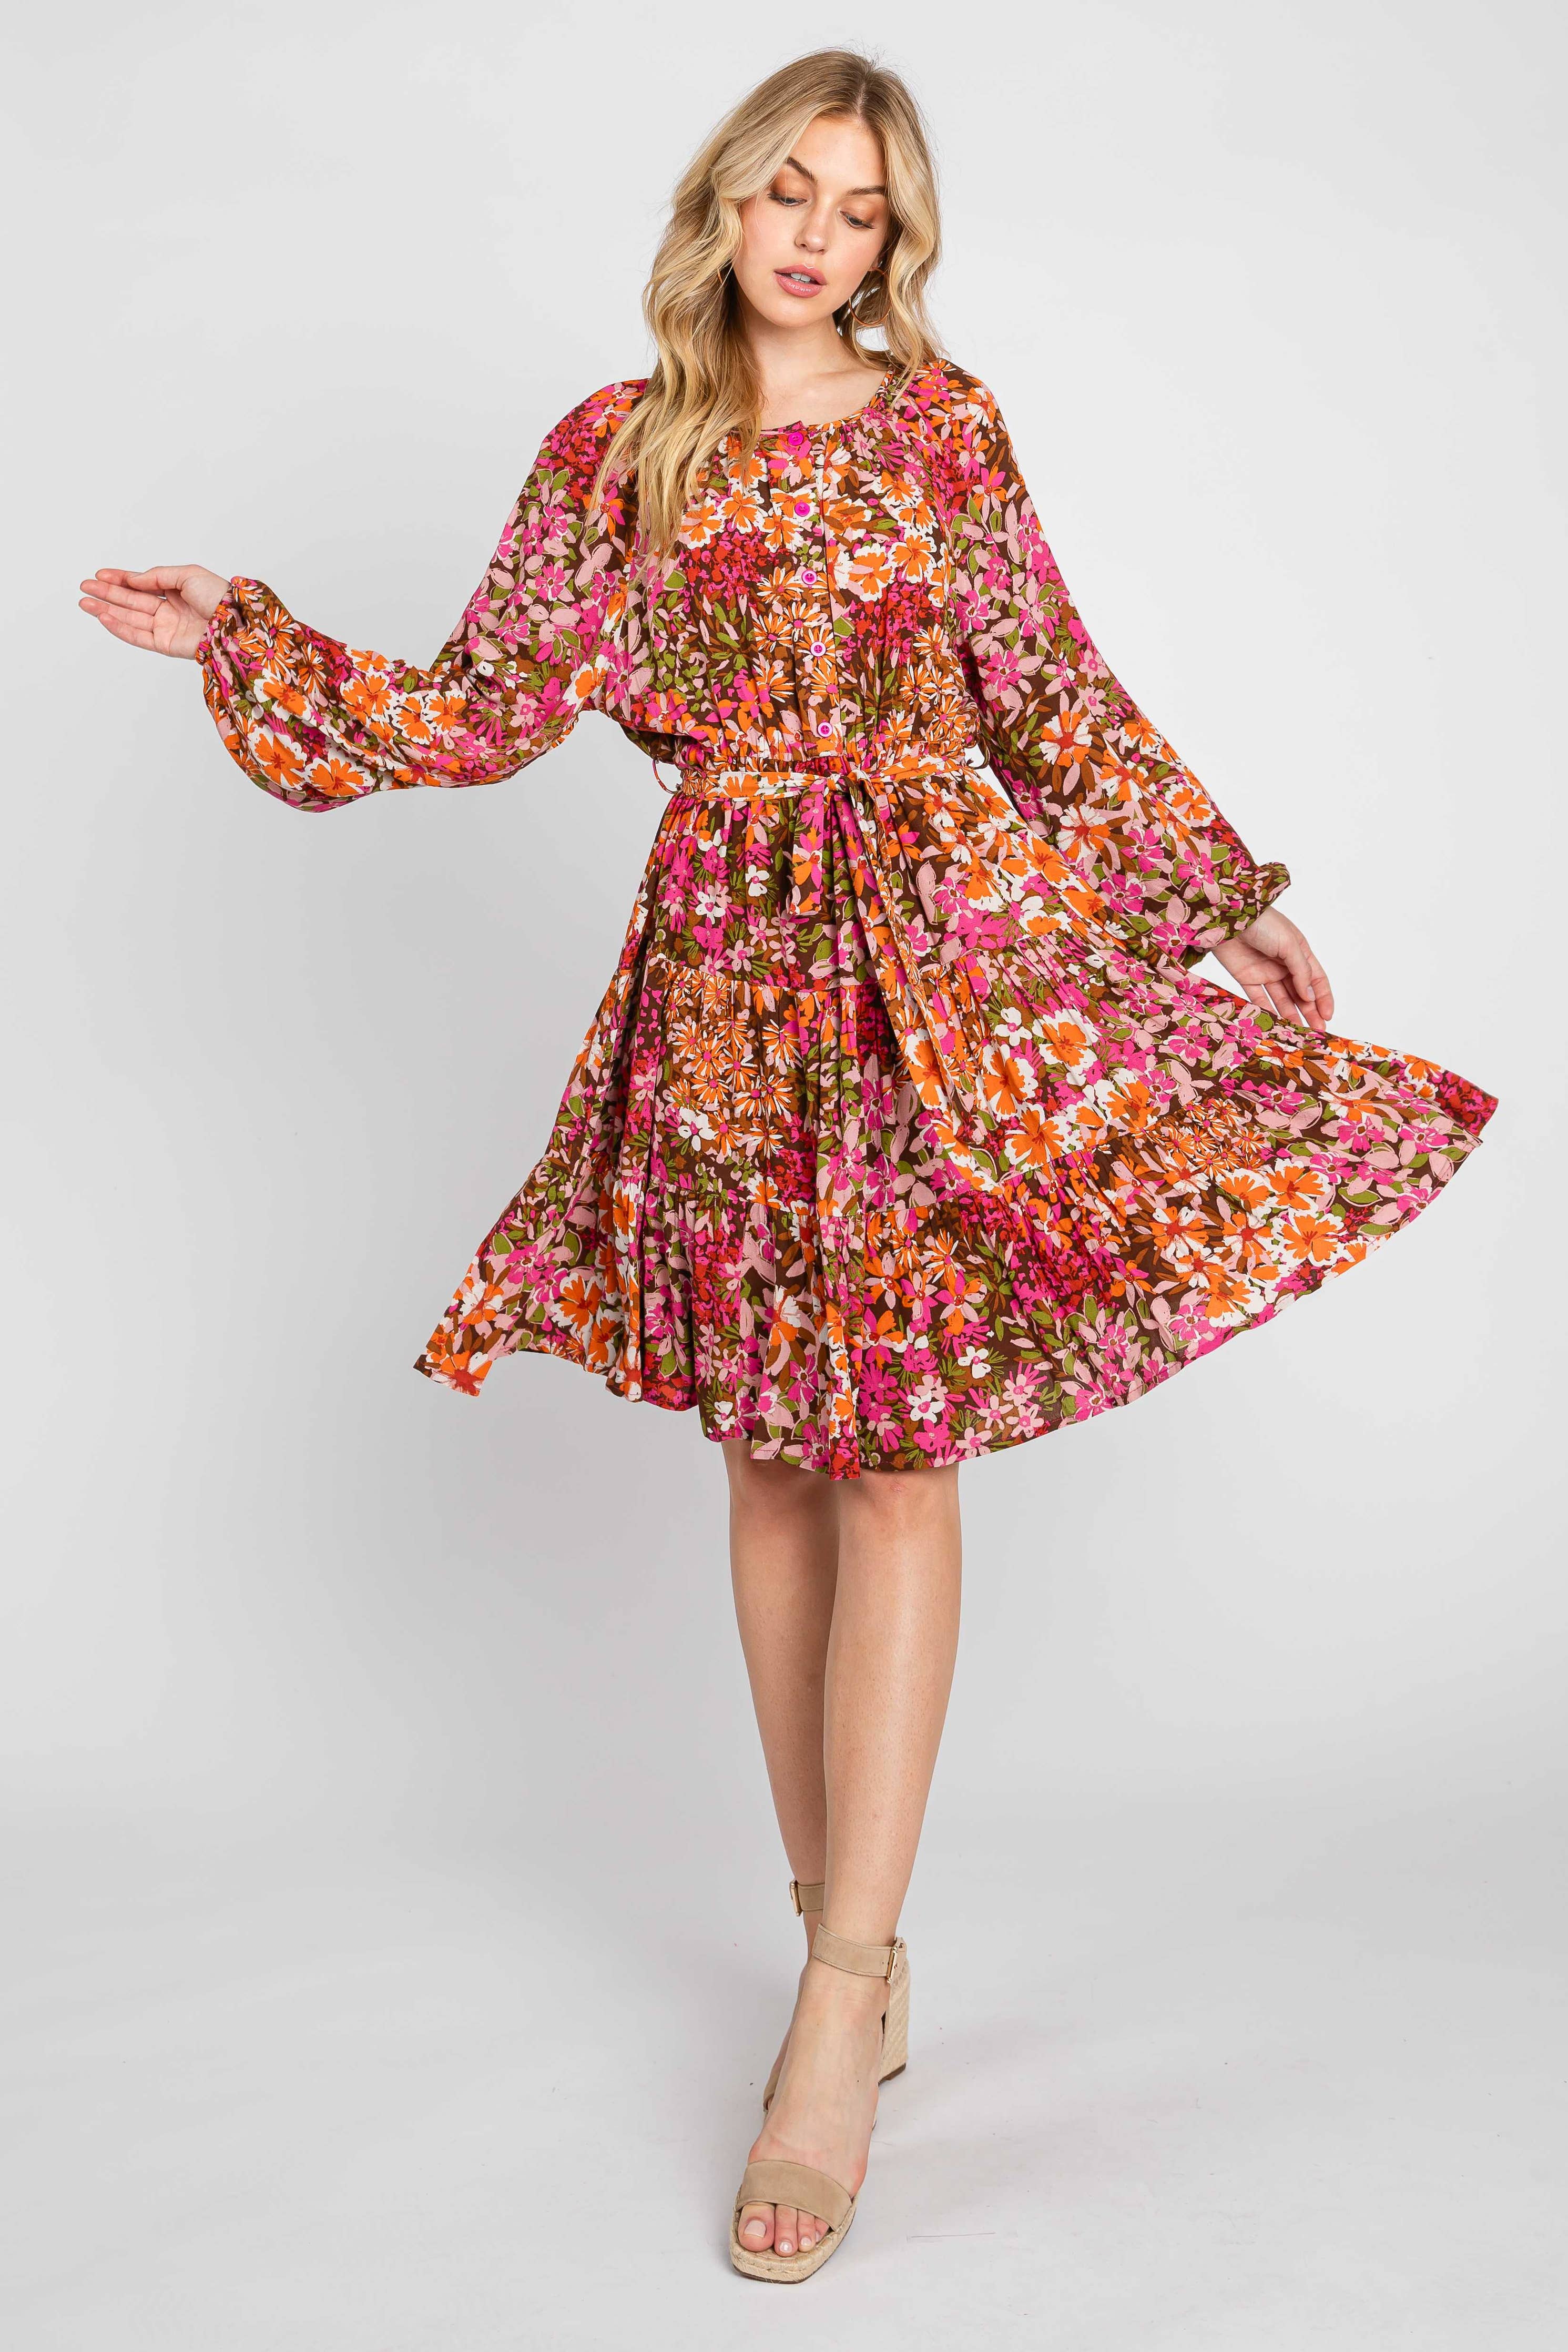 Becca Floral Tiered Dressd